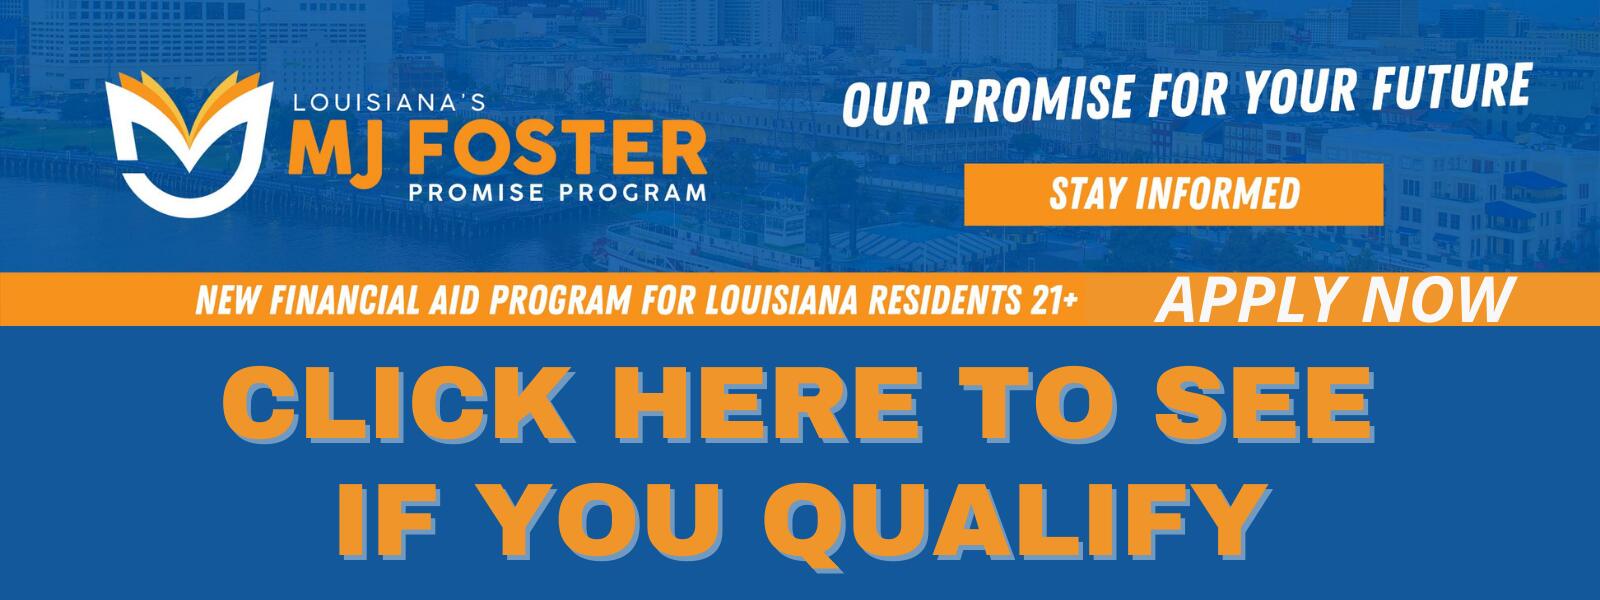 MJ Foster Promise - New Financial Aid Program - Click Here for More Information